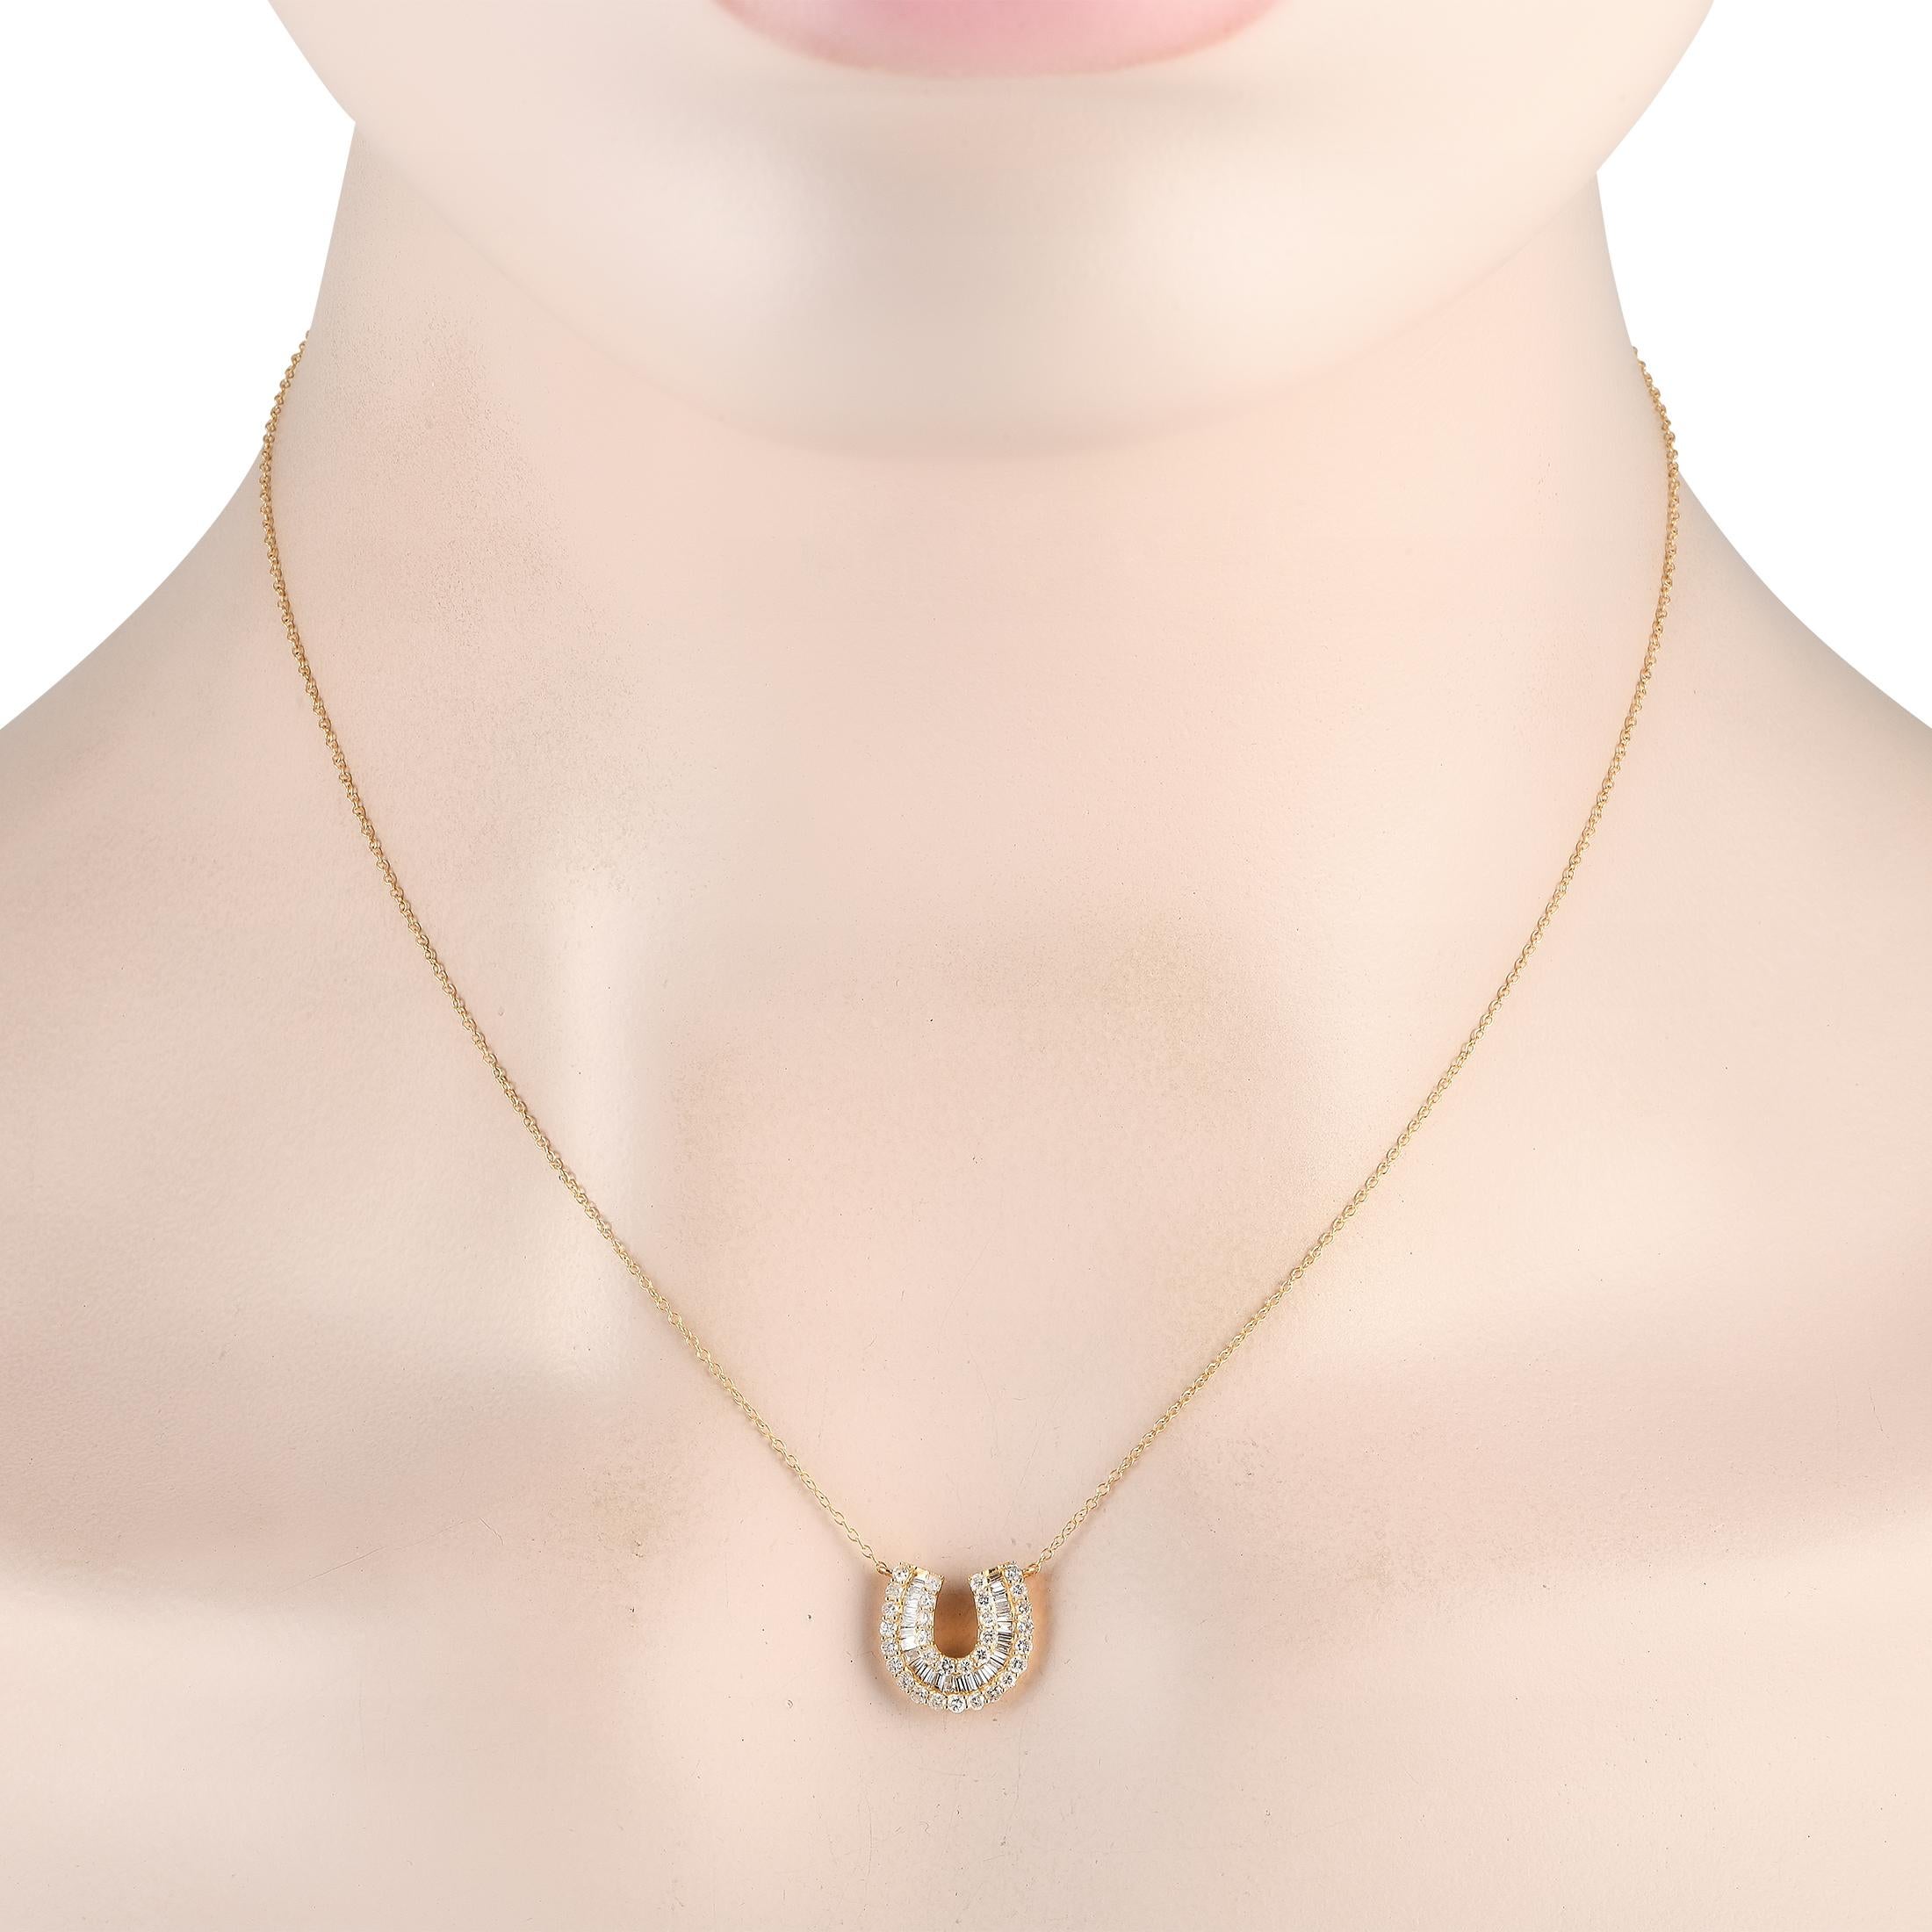 You're lucky to have found this lovely gem! The Horseshoe Necklace is crafted in 14K yellow gold and features a U-shaped row of baguette diamonds set in between U-shaped rows of round diamonds. The 0.45 x 0.50 pendant suspends from a 16 chain with a